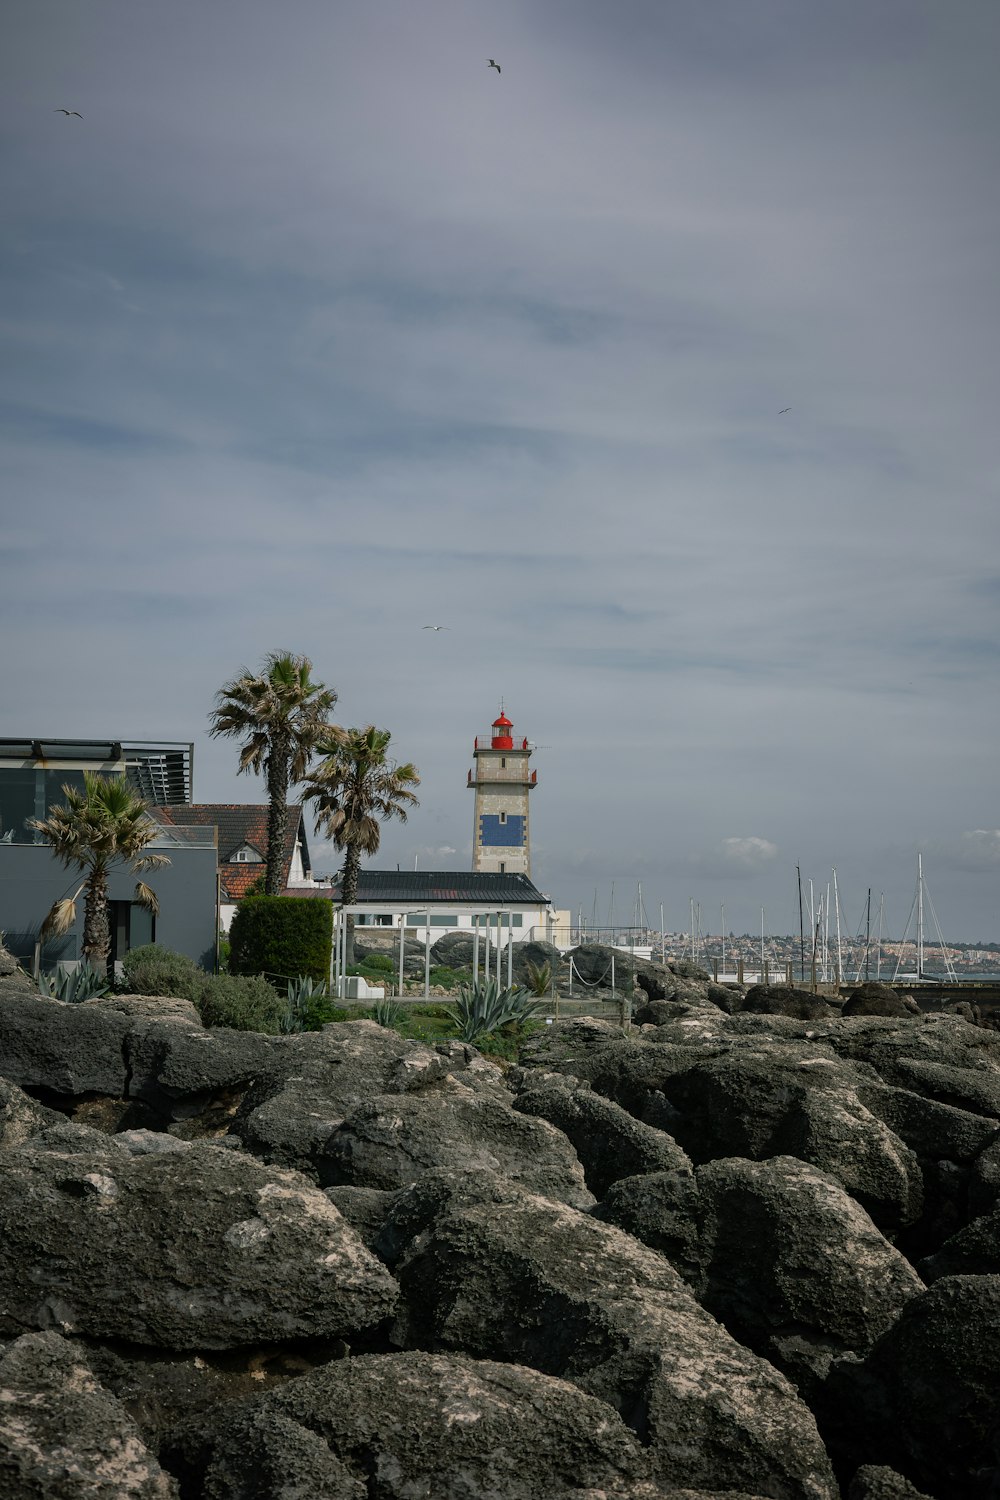 a lighthouse on a rocky shore with palm trees